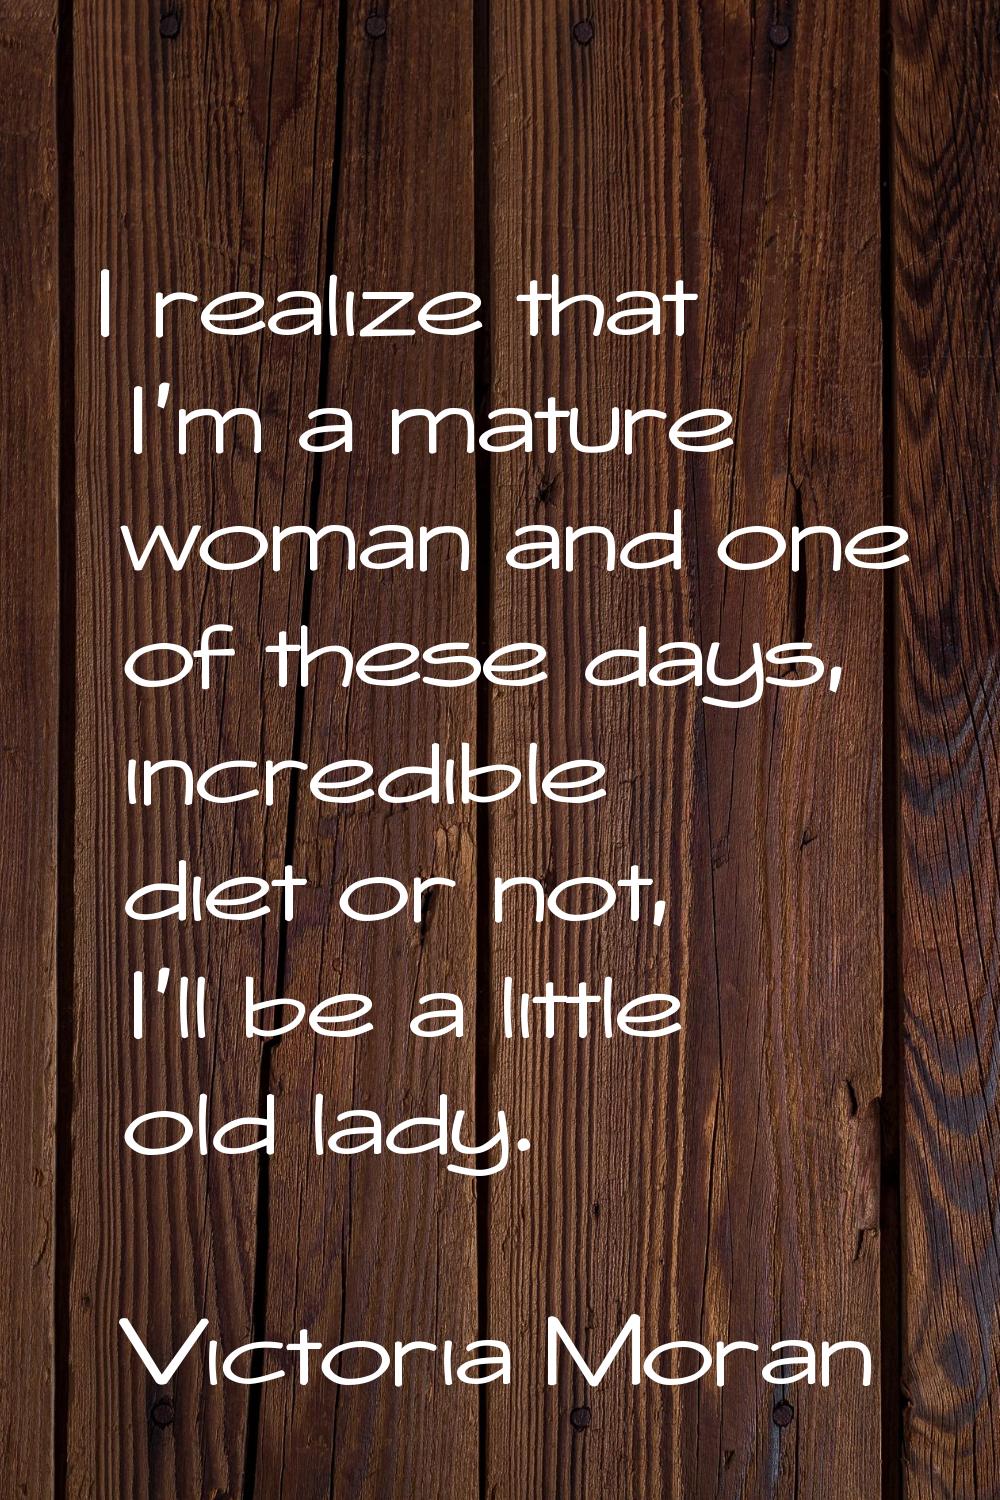 I realize that I'm a mature woman and one of these days, incredible diet or not, I'll be a little o